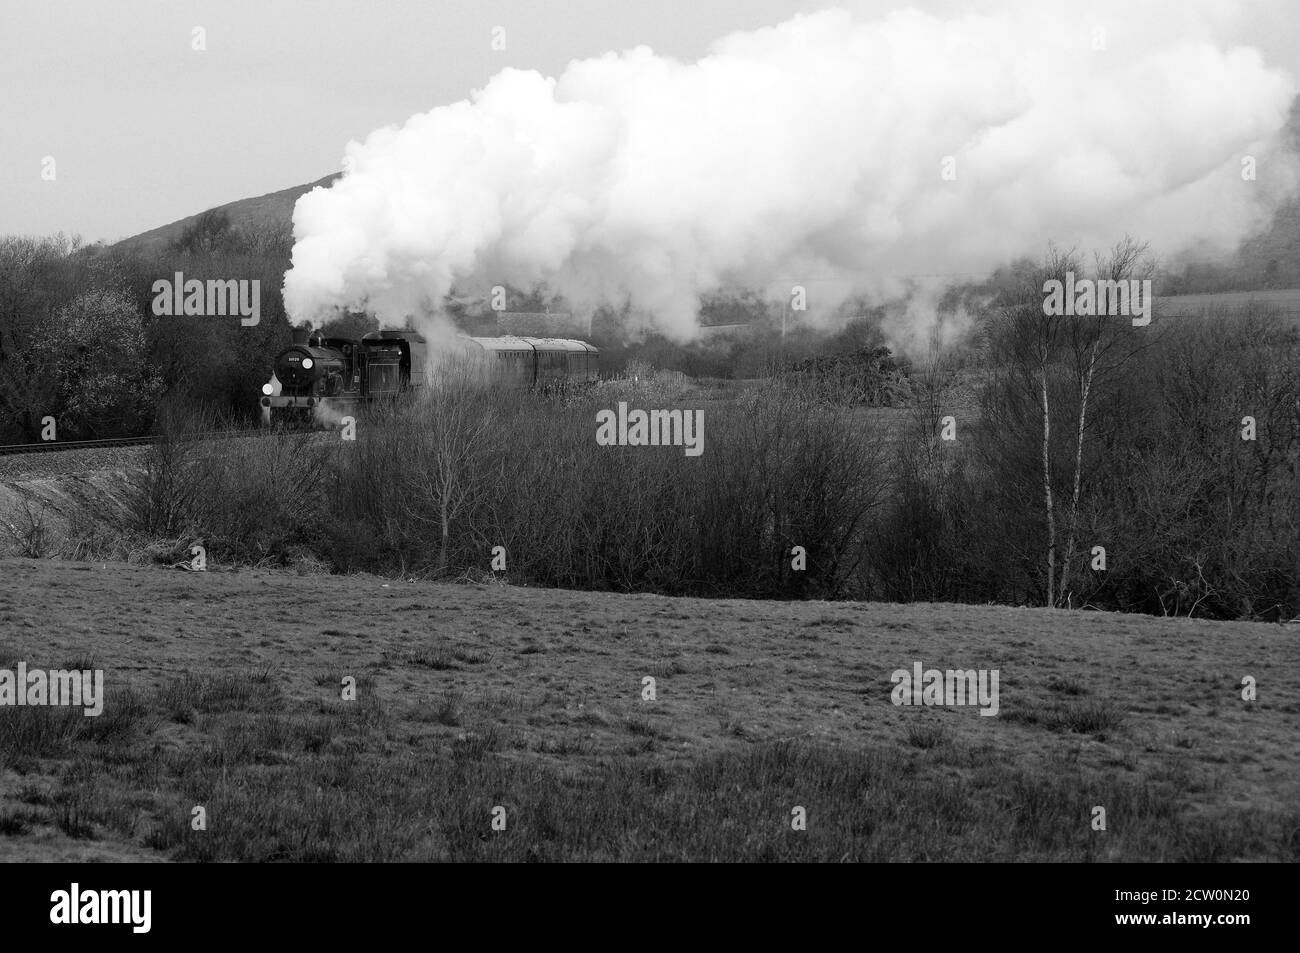 '30120' leads 'Manston' south from Corfe Castle. Stock Photo